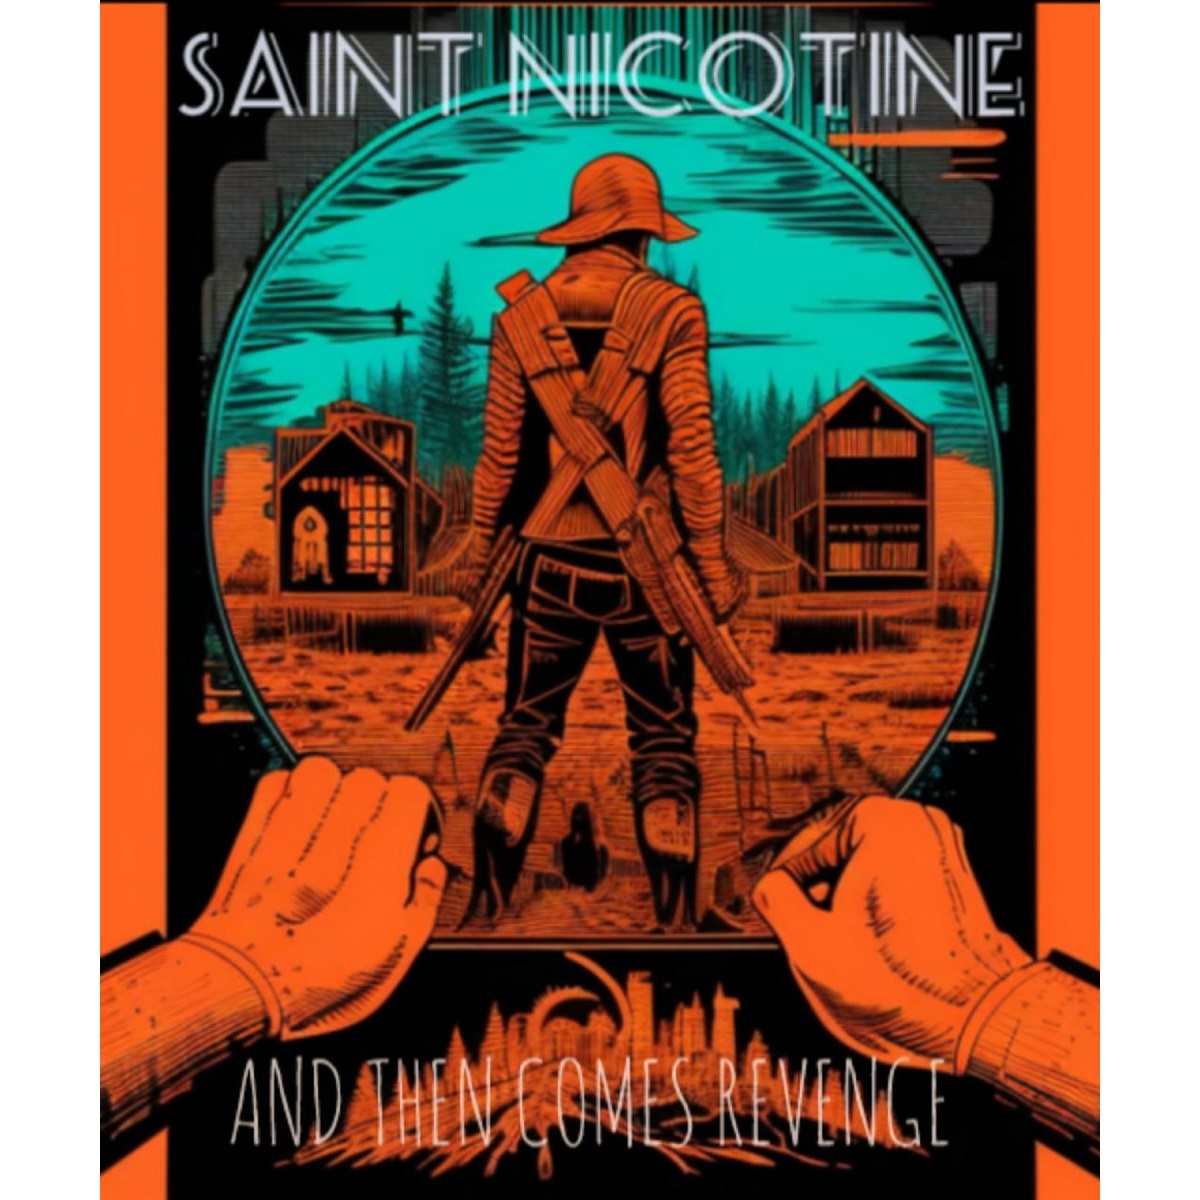 SAINT NICOTINE - And Then Comes Revenge cover 